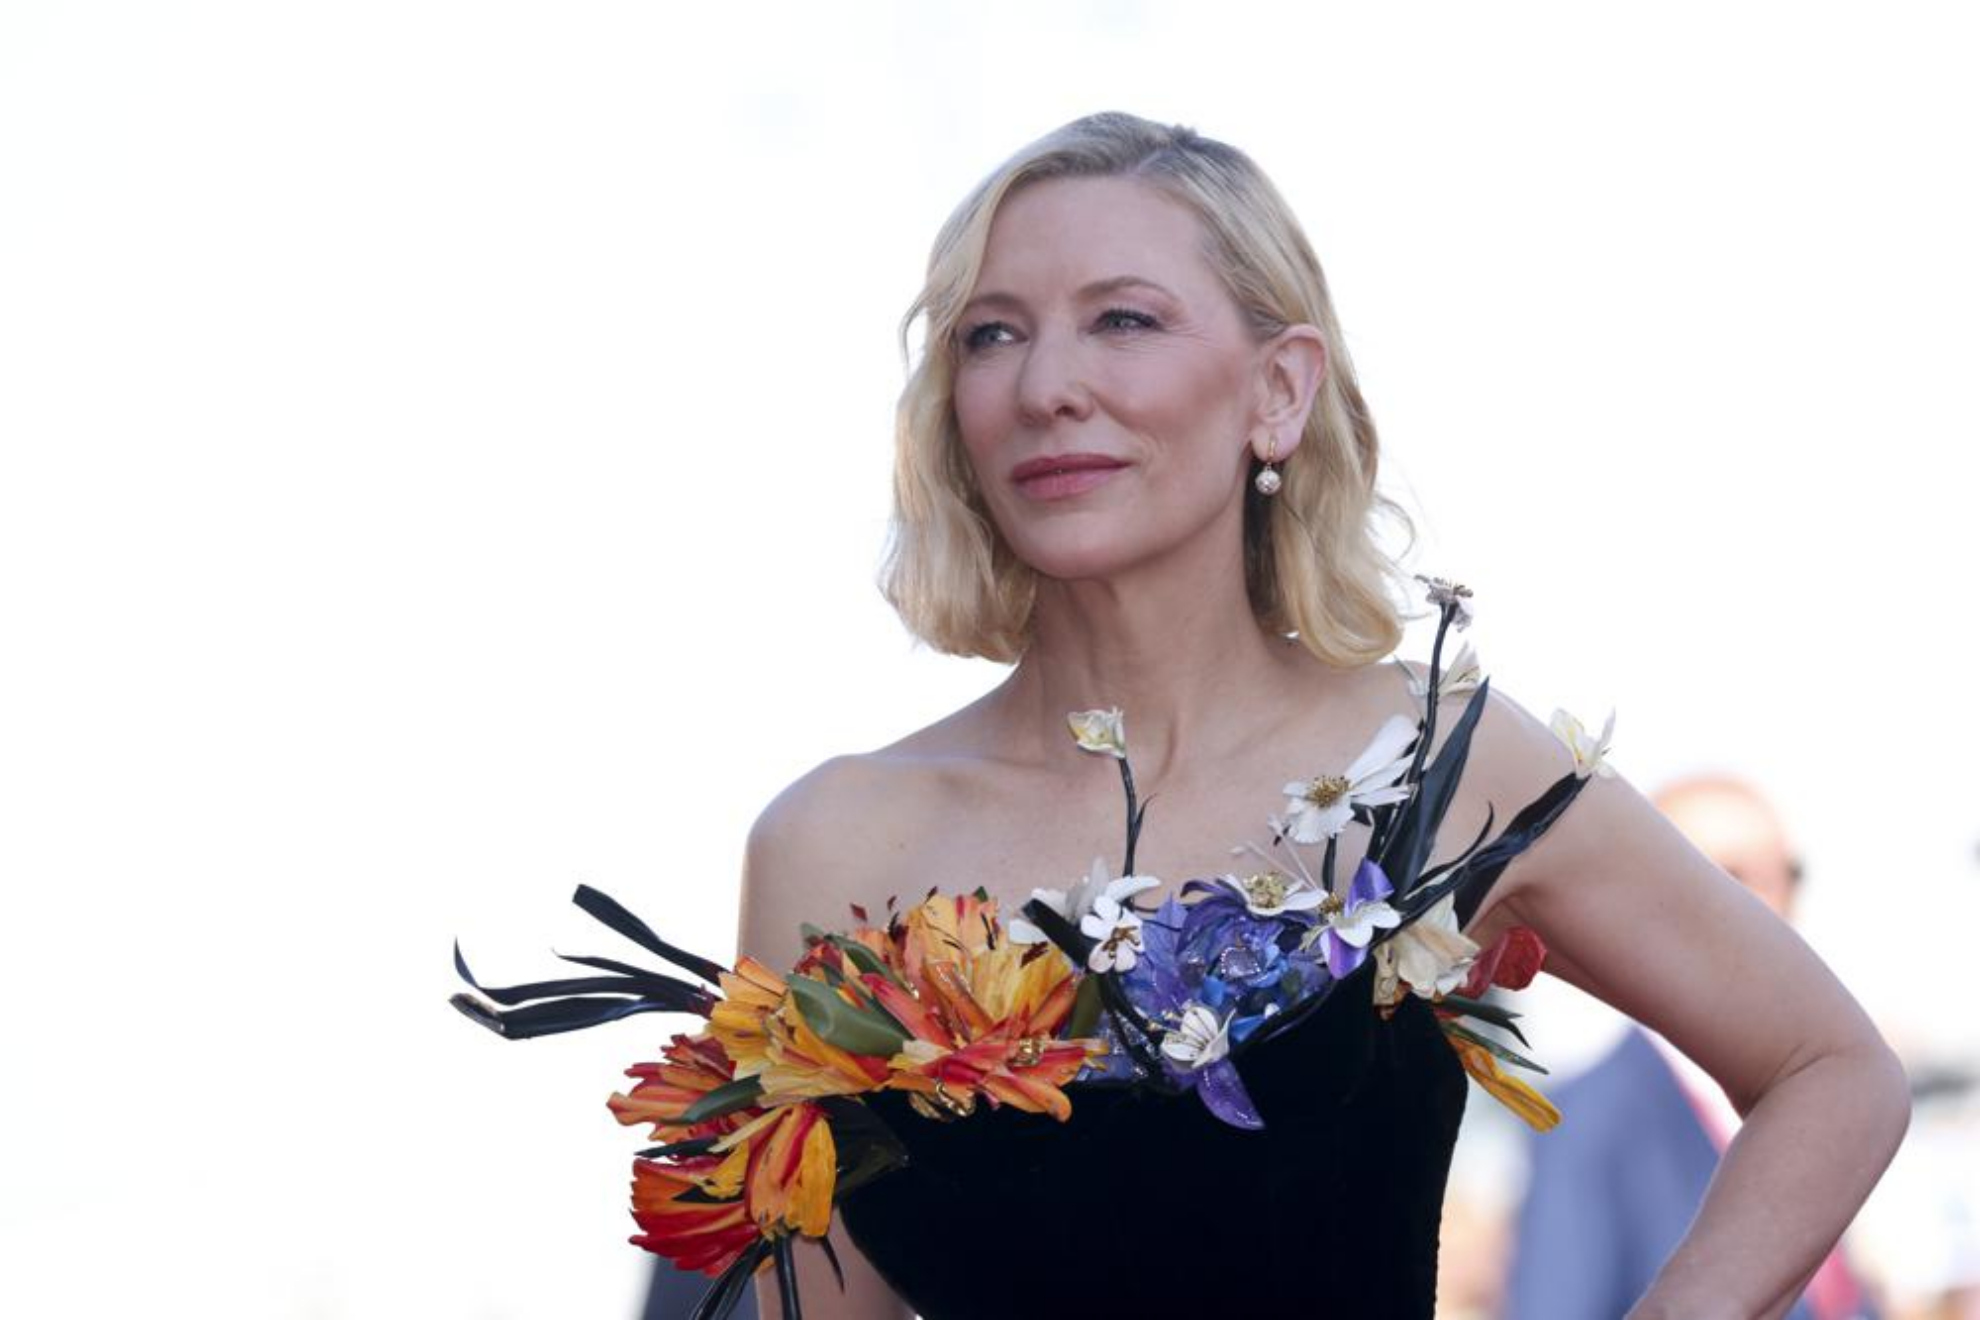 Cate Blanchett was once again nominated to the Oscars.